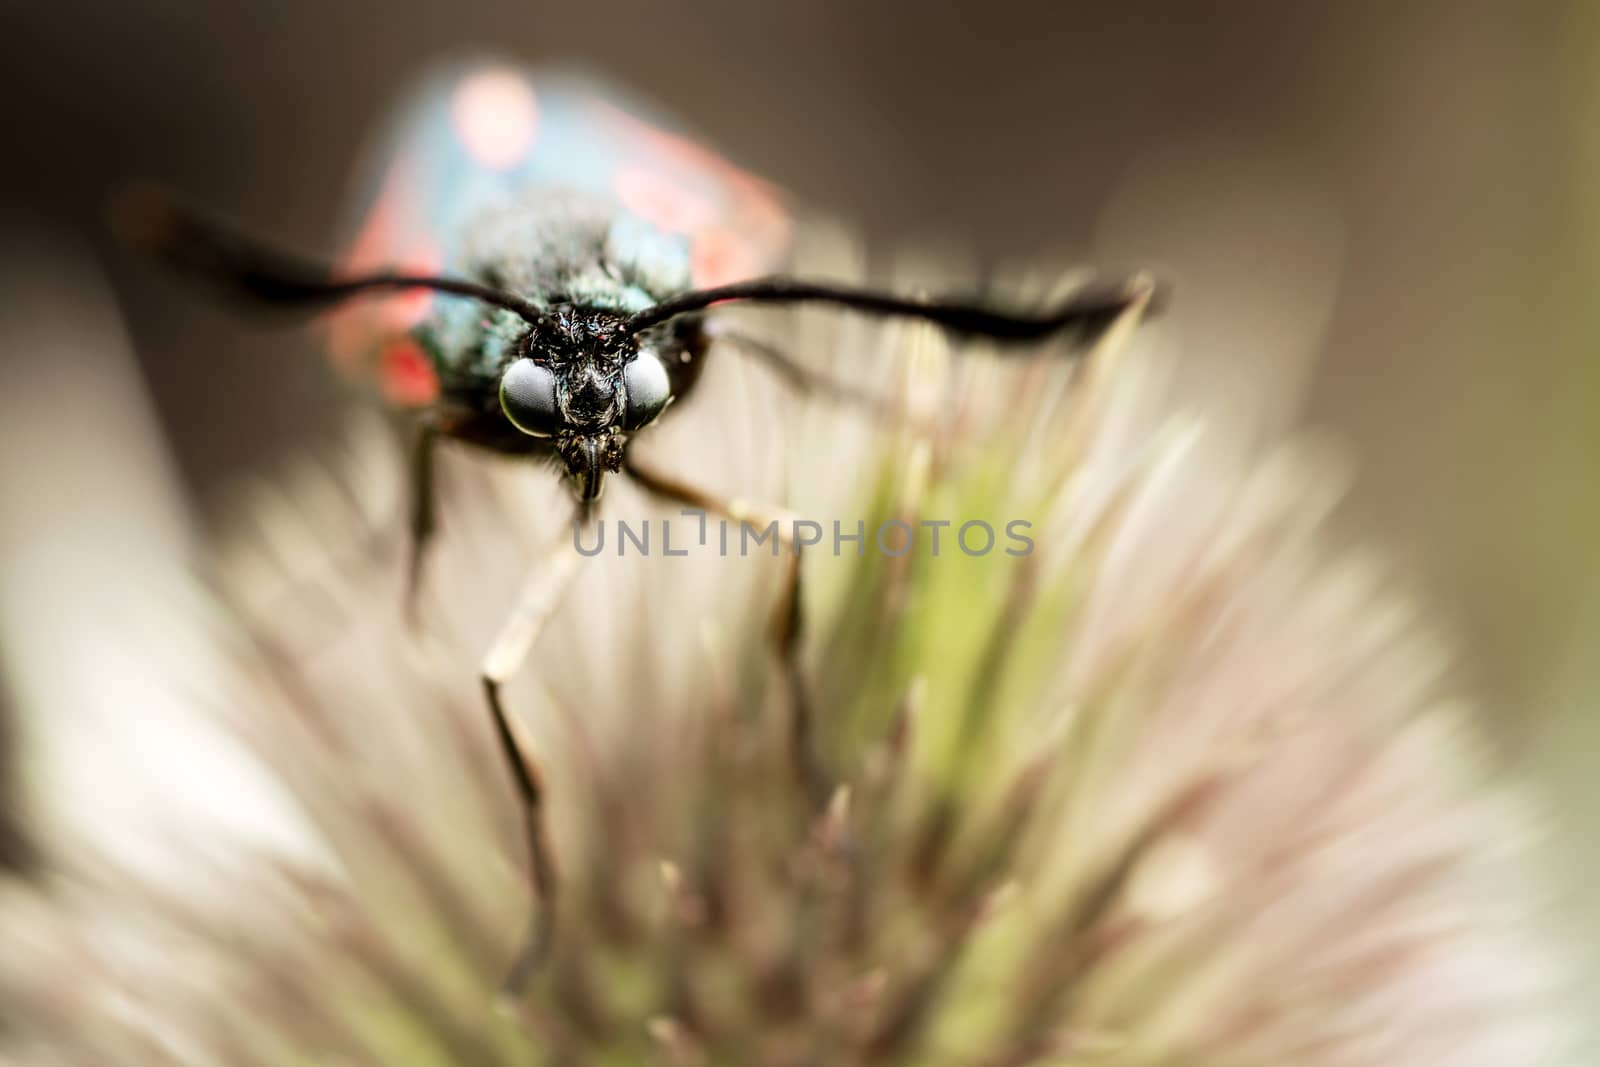 Macro shot of butterfly eyes with blurred background and foreground.